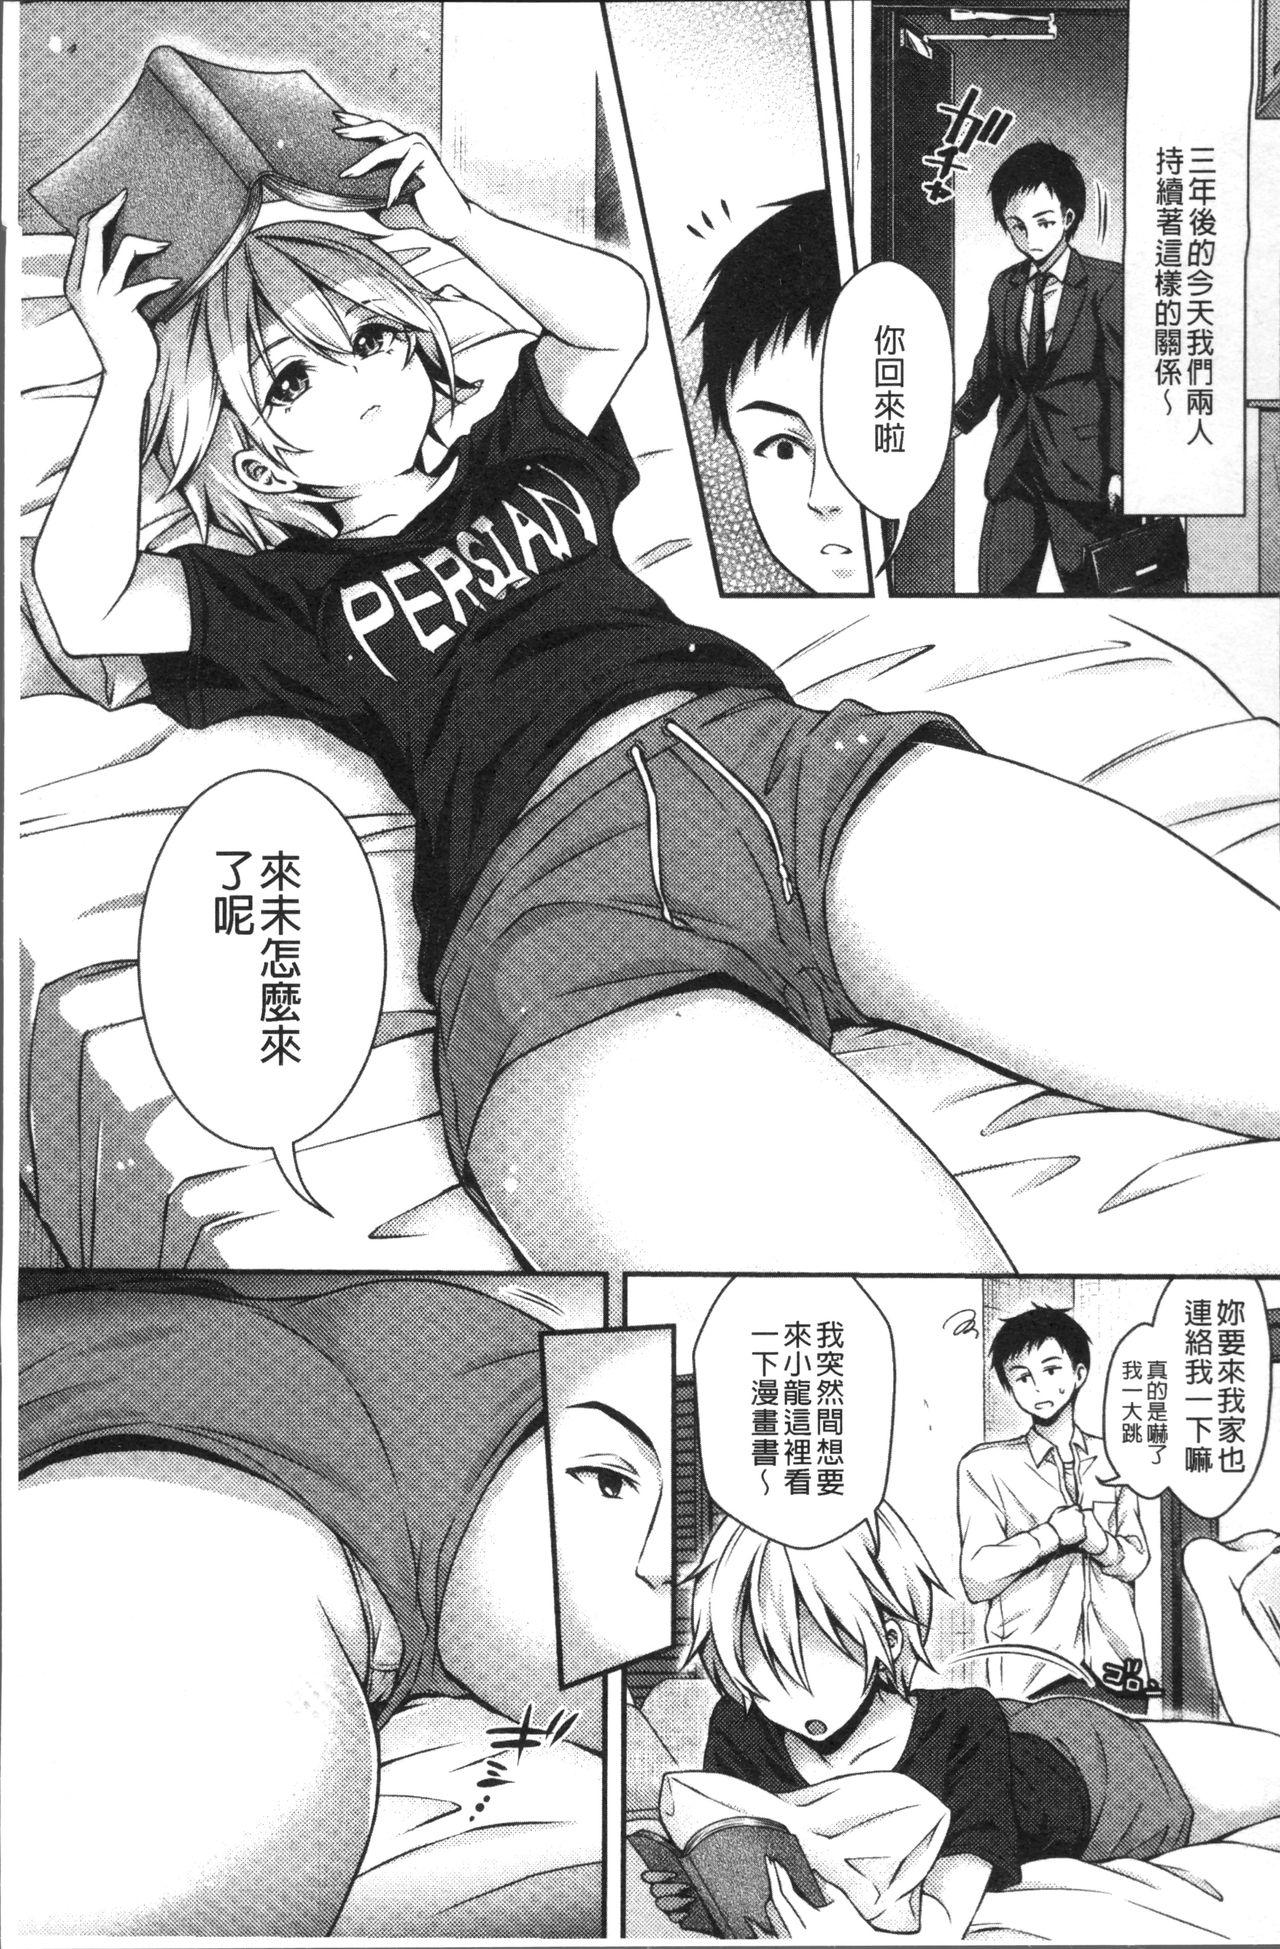 Pounded HoneMemo - Honey Memorial | 香甜記憶 Cei - Page 10